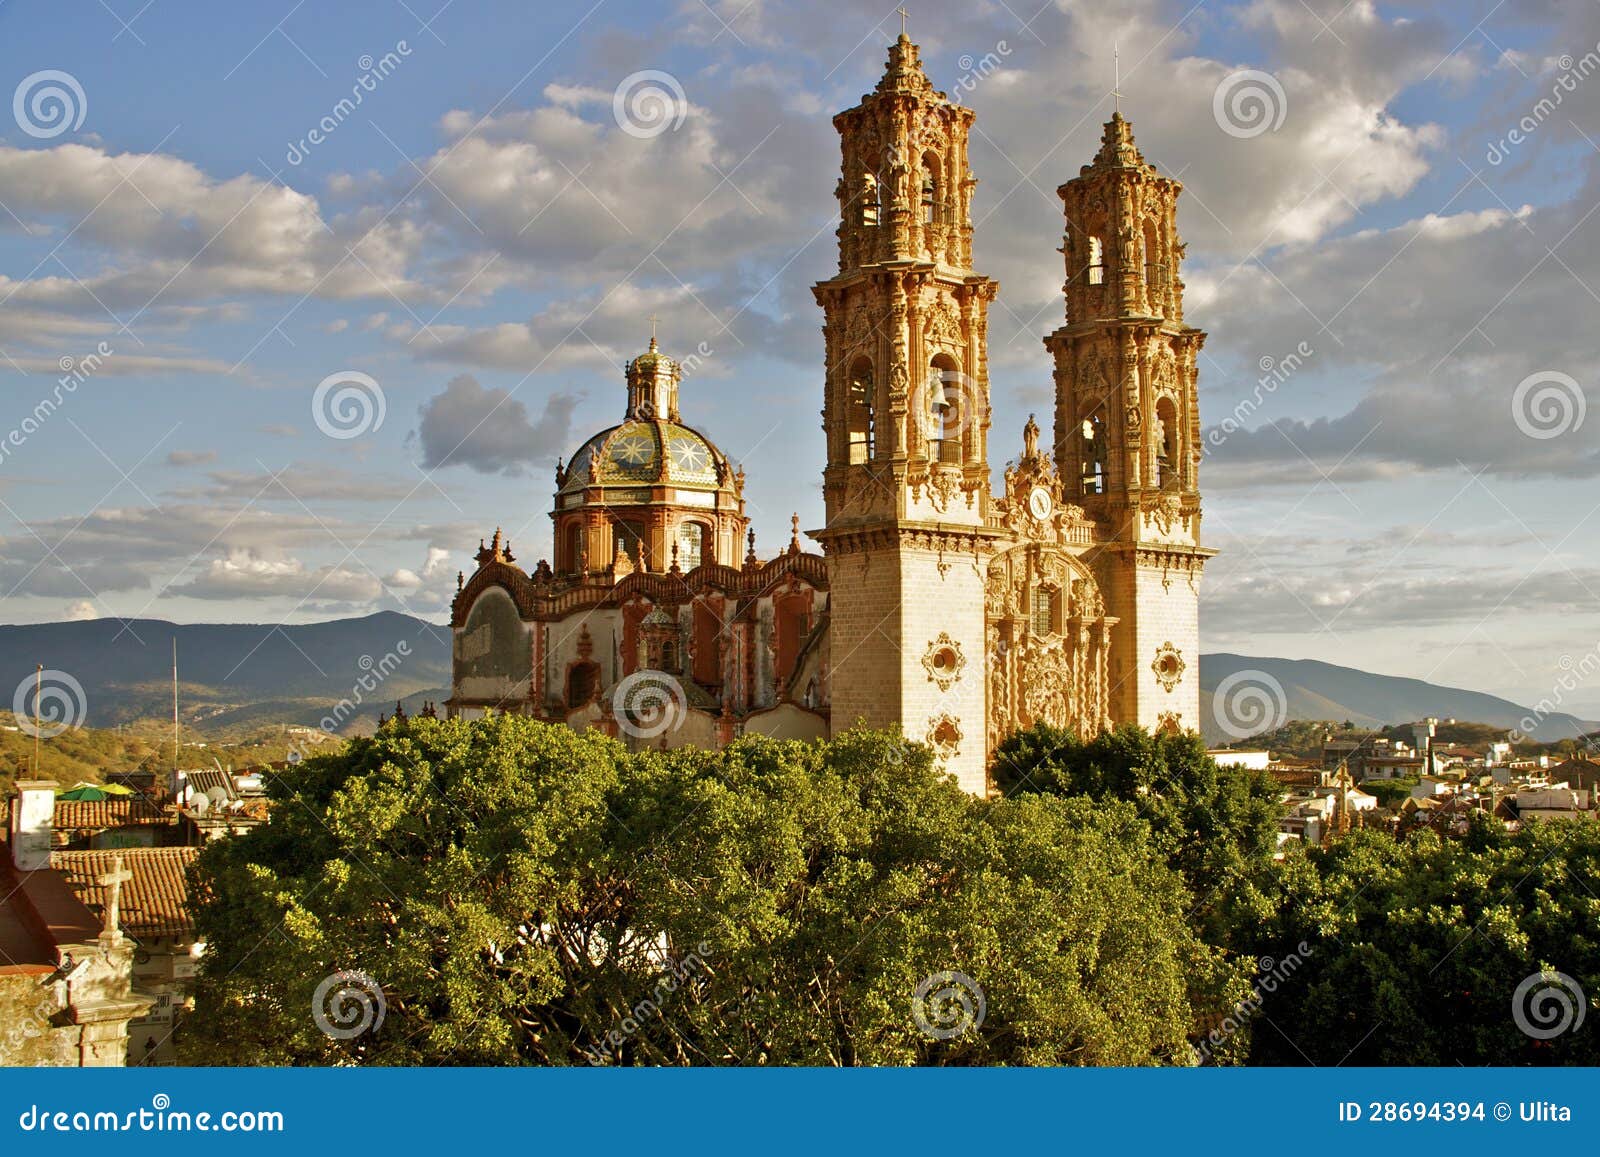 taxco cathedral, mexico